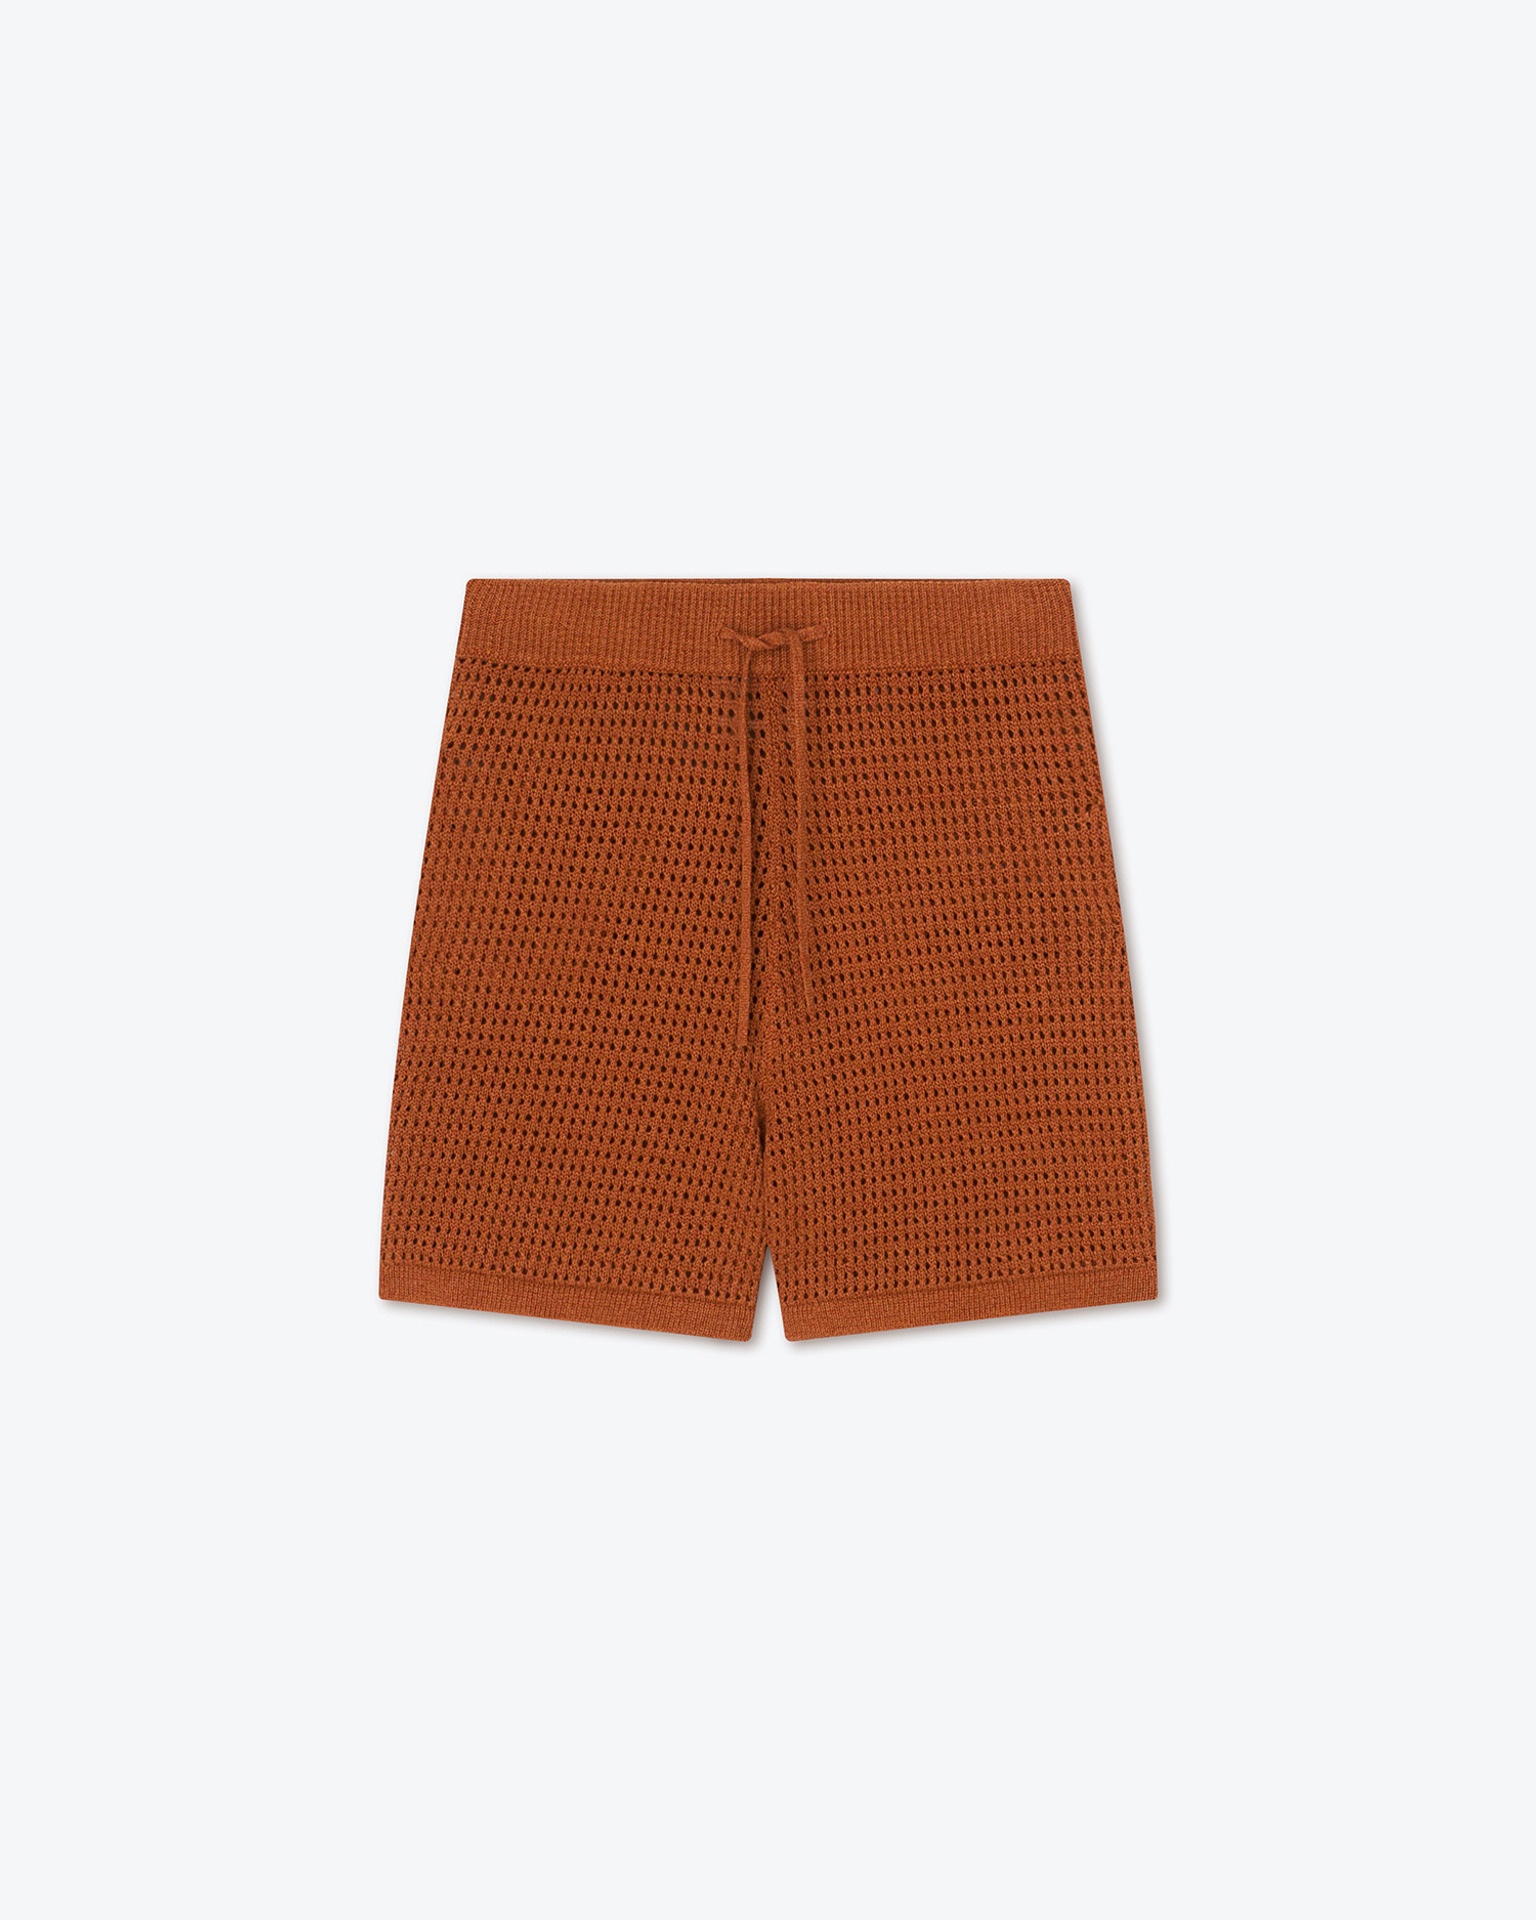 FICO - Knitted shorts - Rust - 1